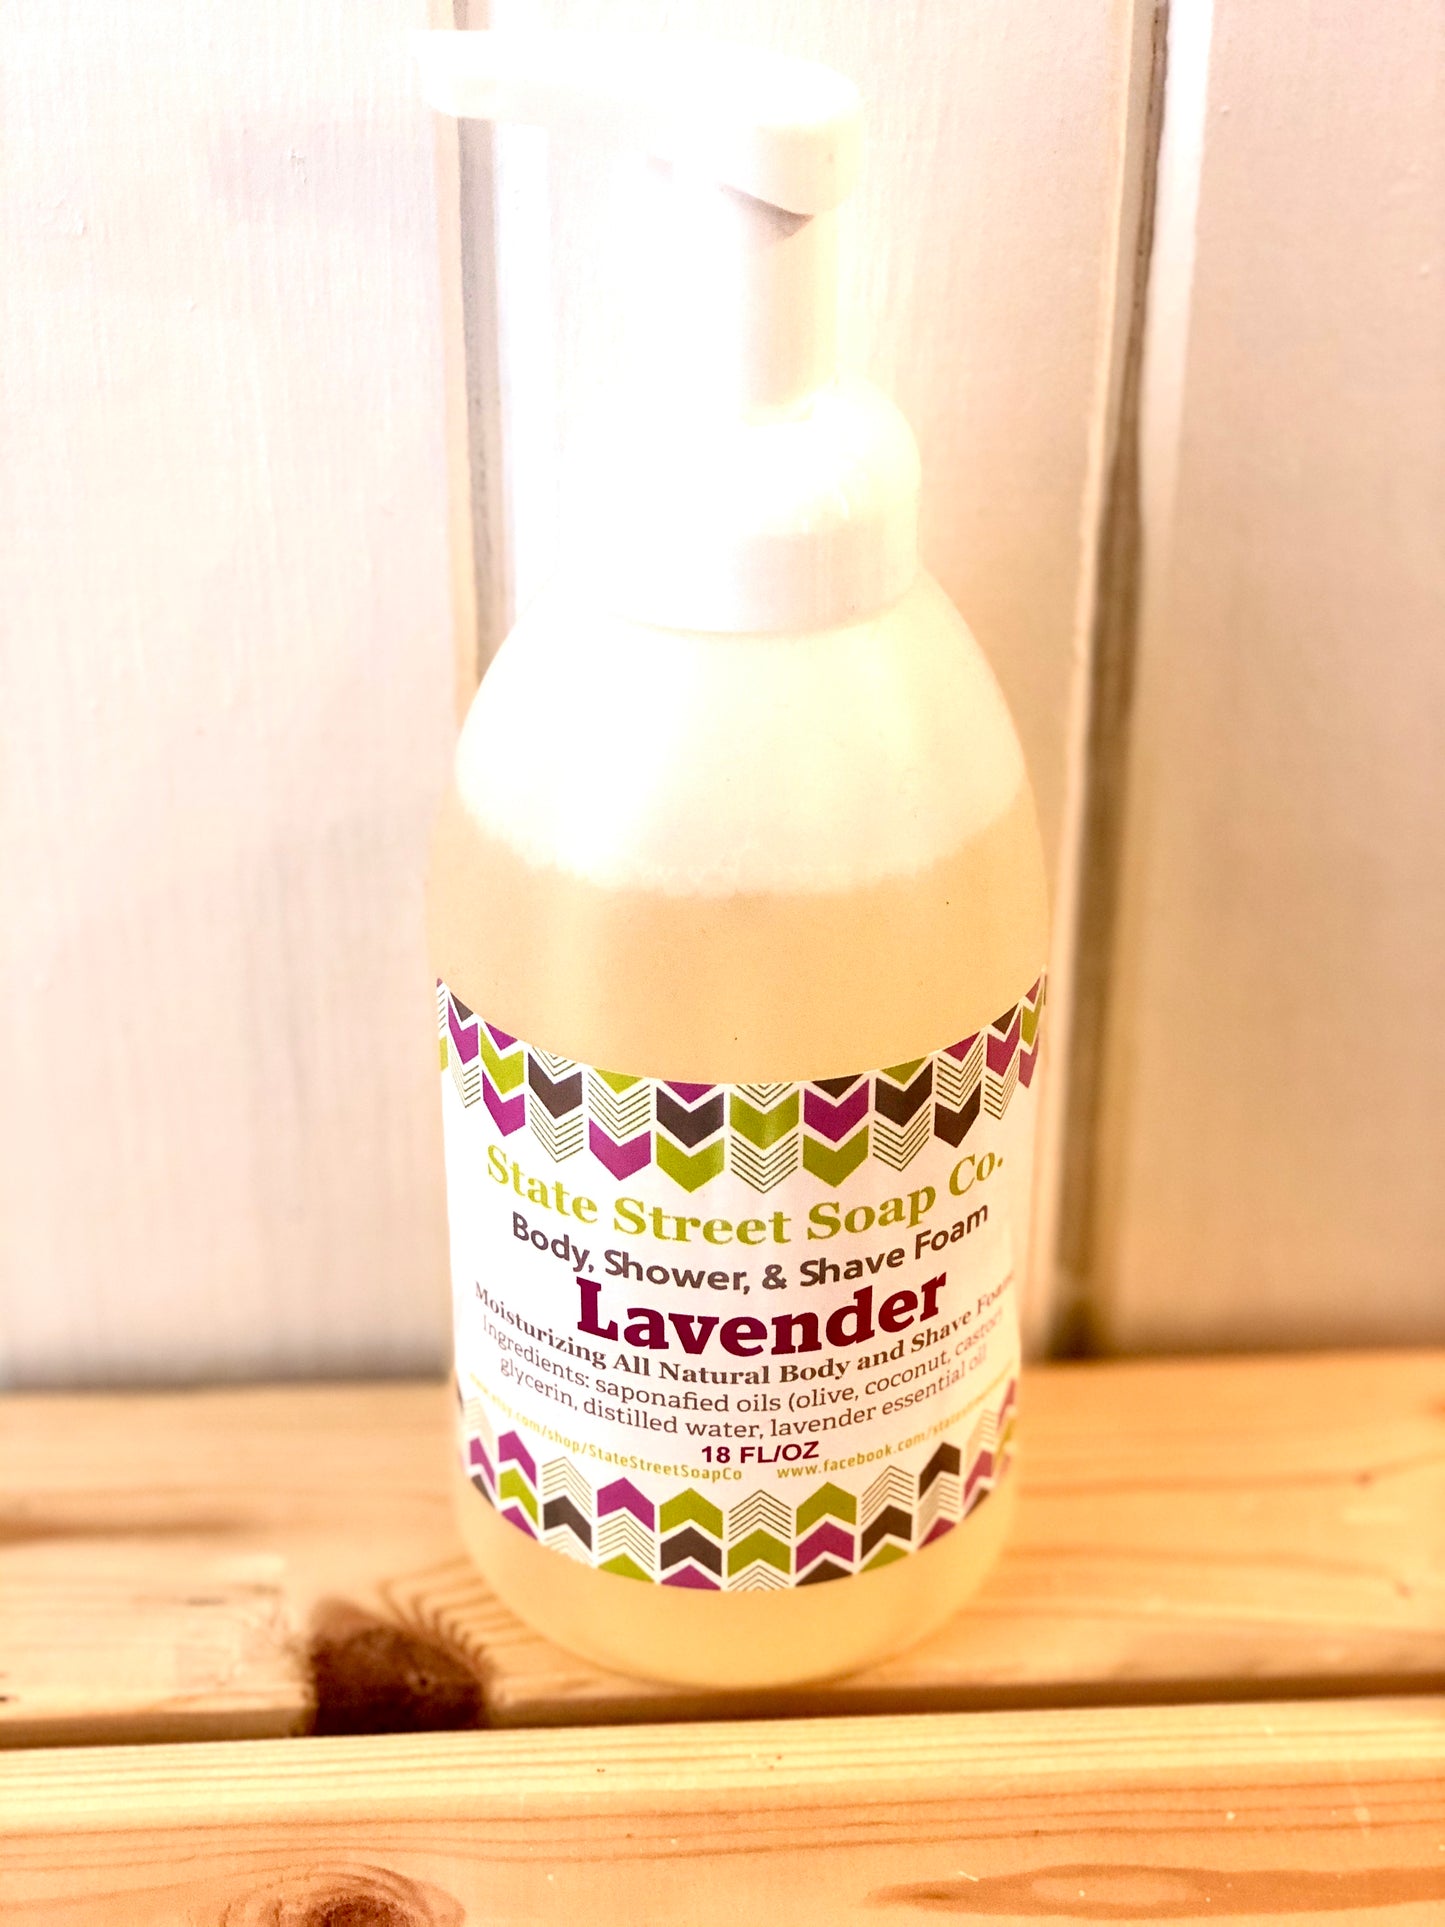 Lavender Body Shower and Shave Foam